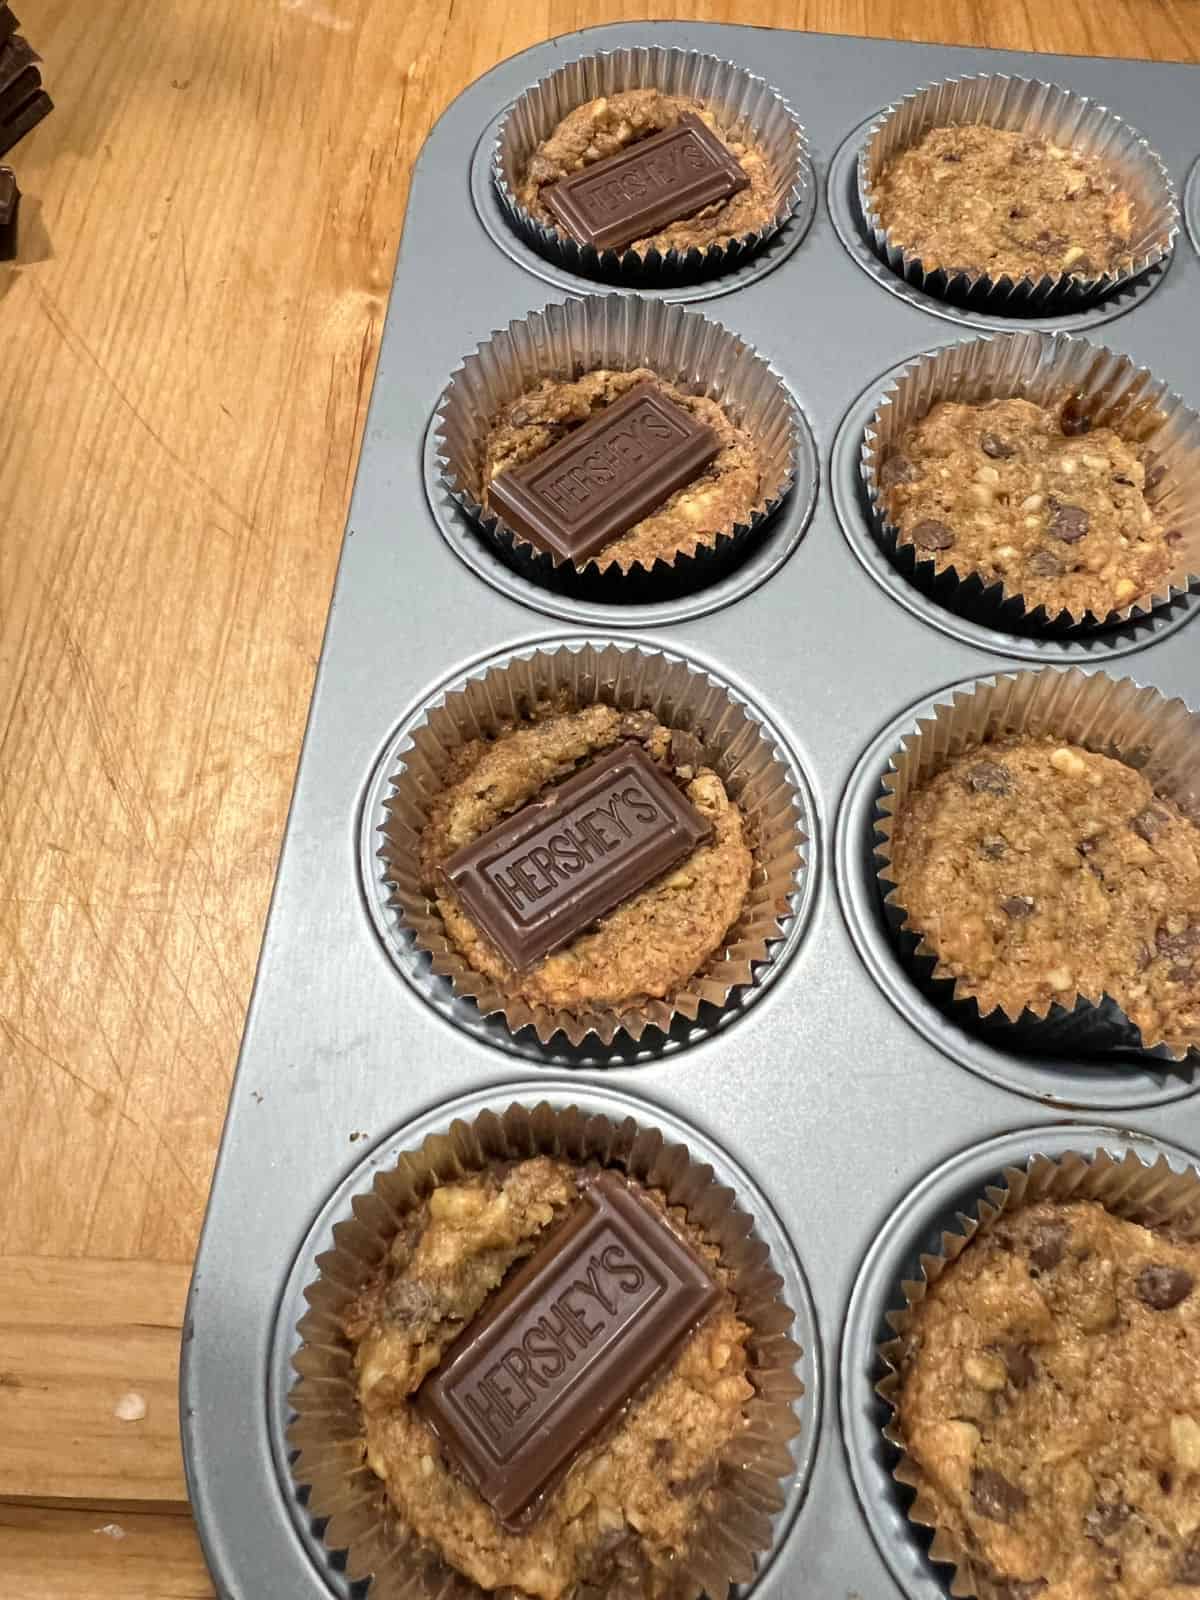 placing a piece of chocolate bar on top of each warm cookie.